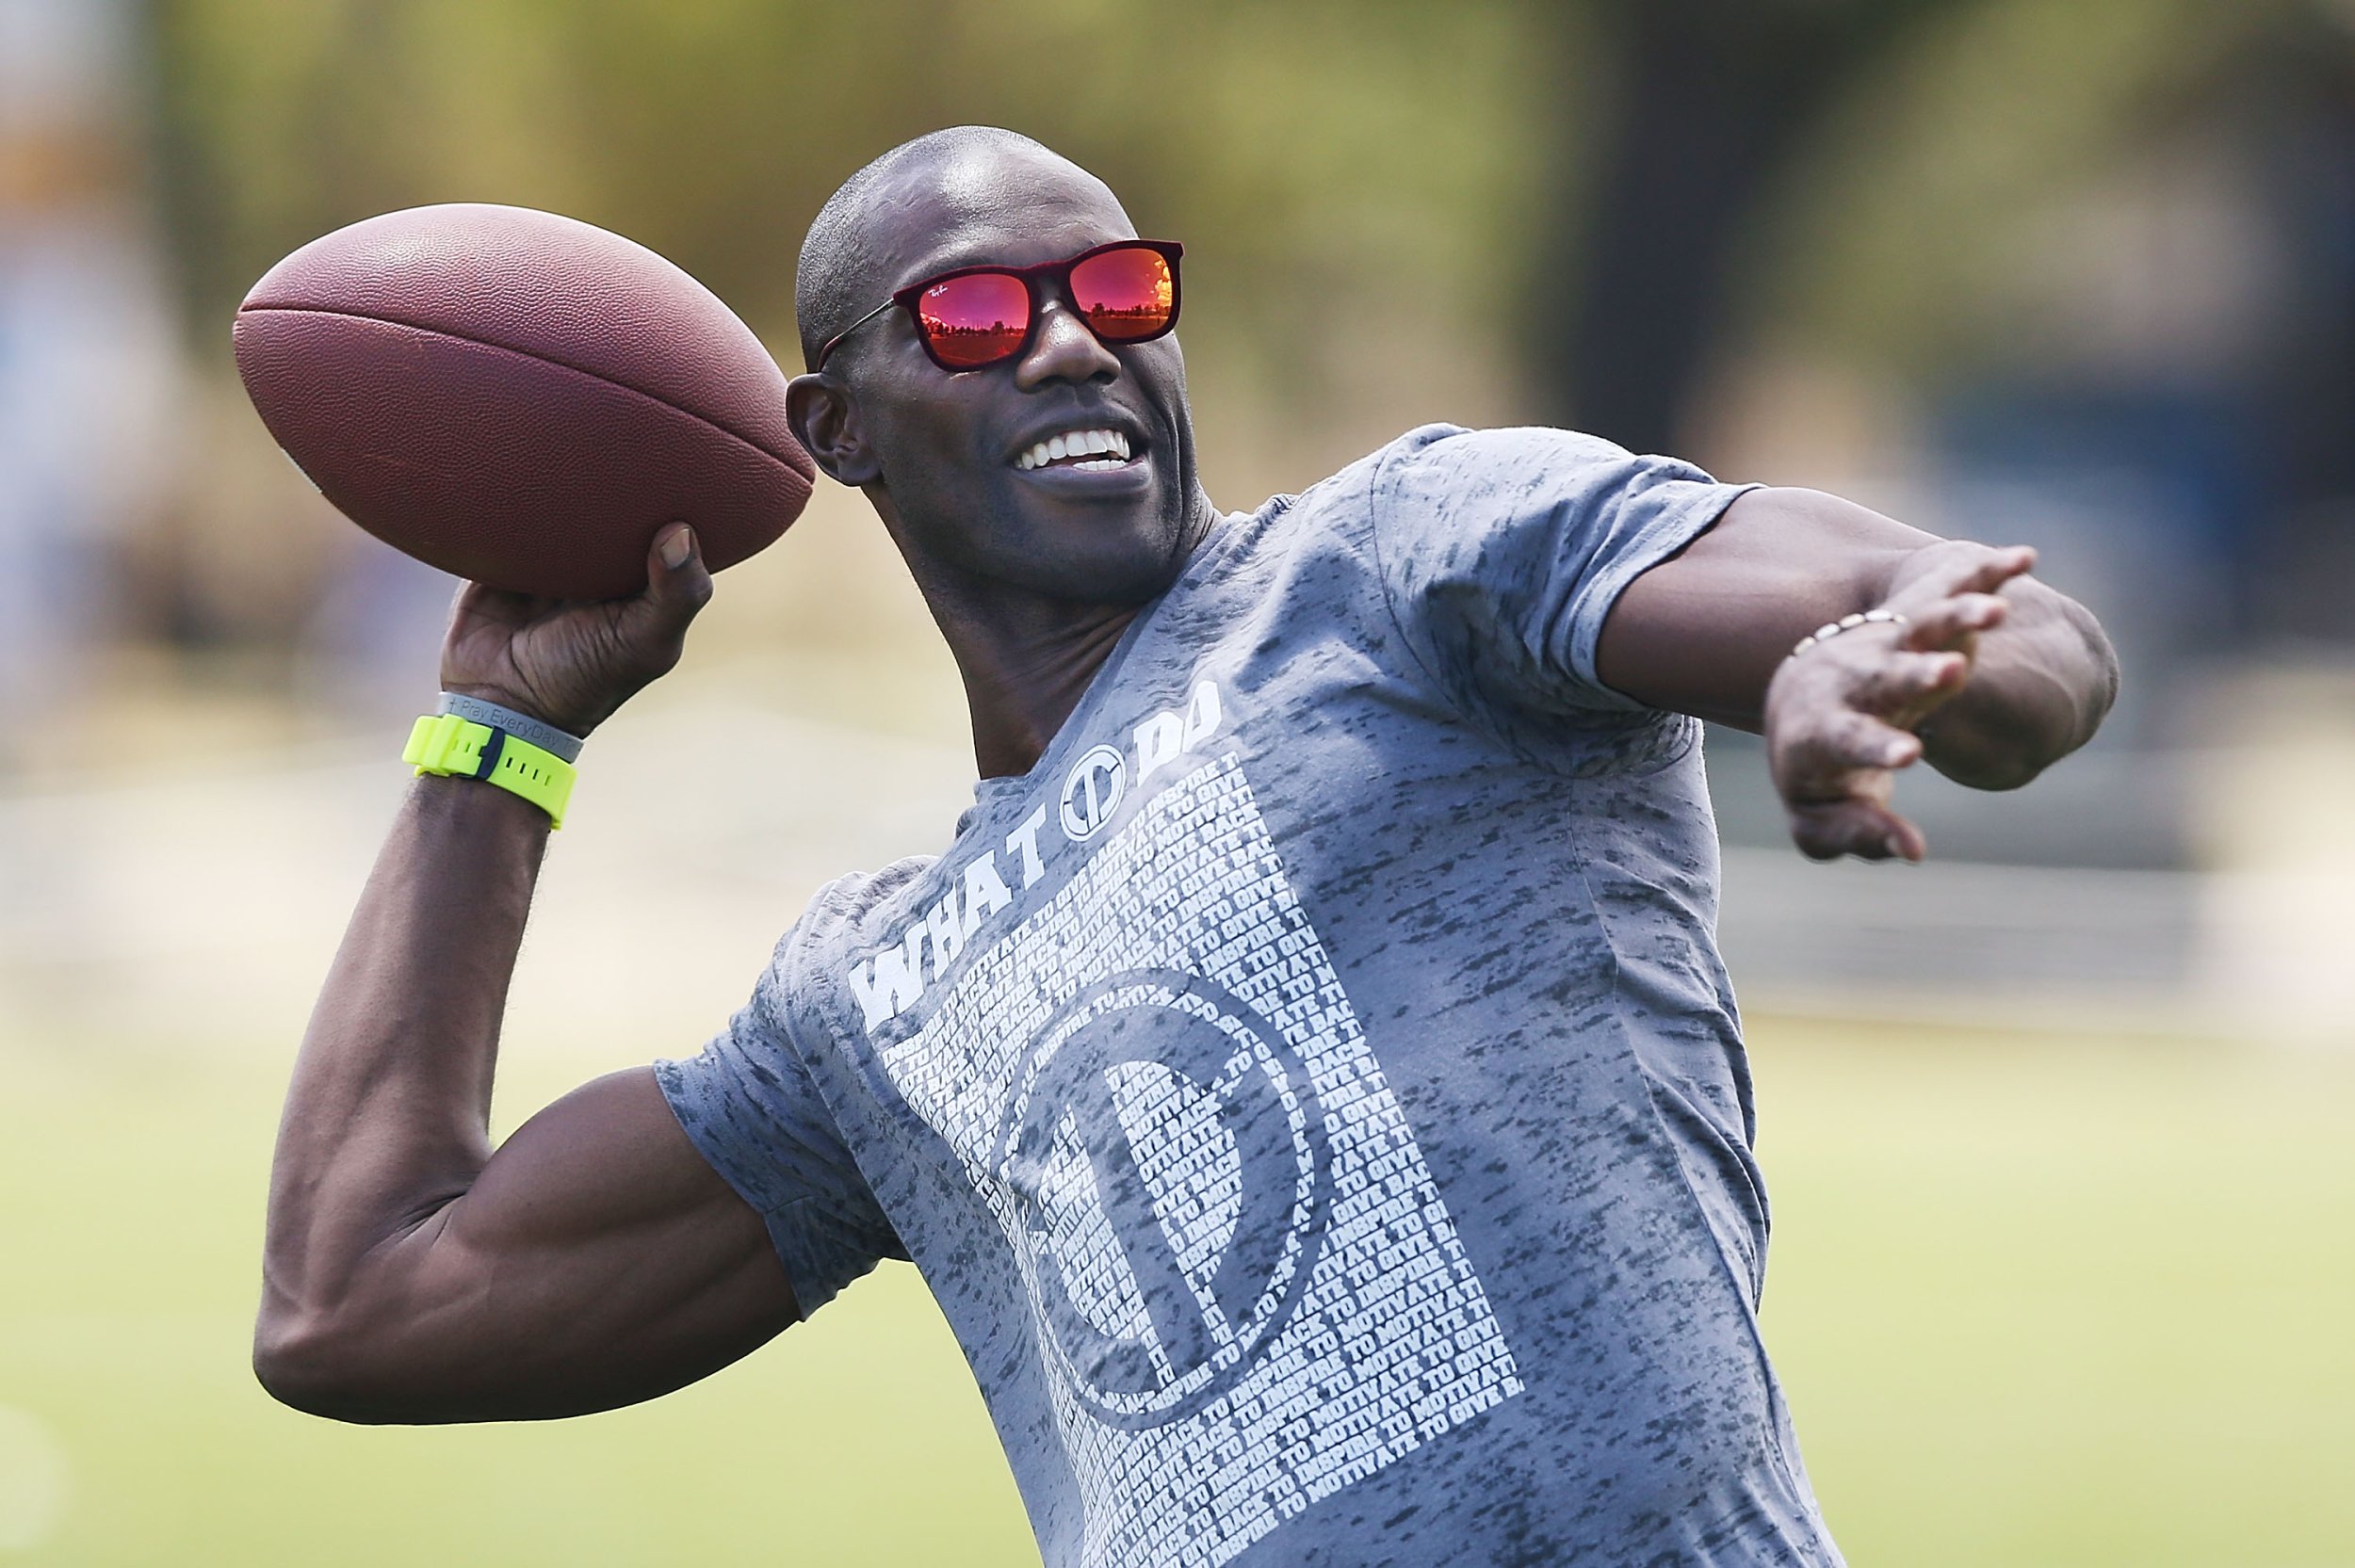 Cowboys, Terrell Owens unable to reach deal as 49-year-old asks